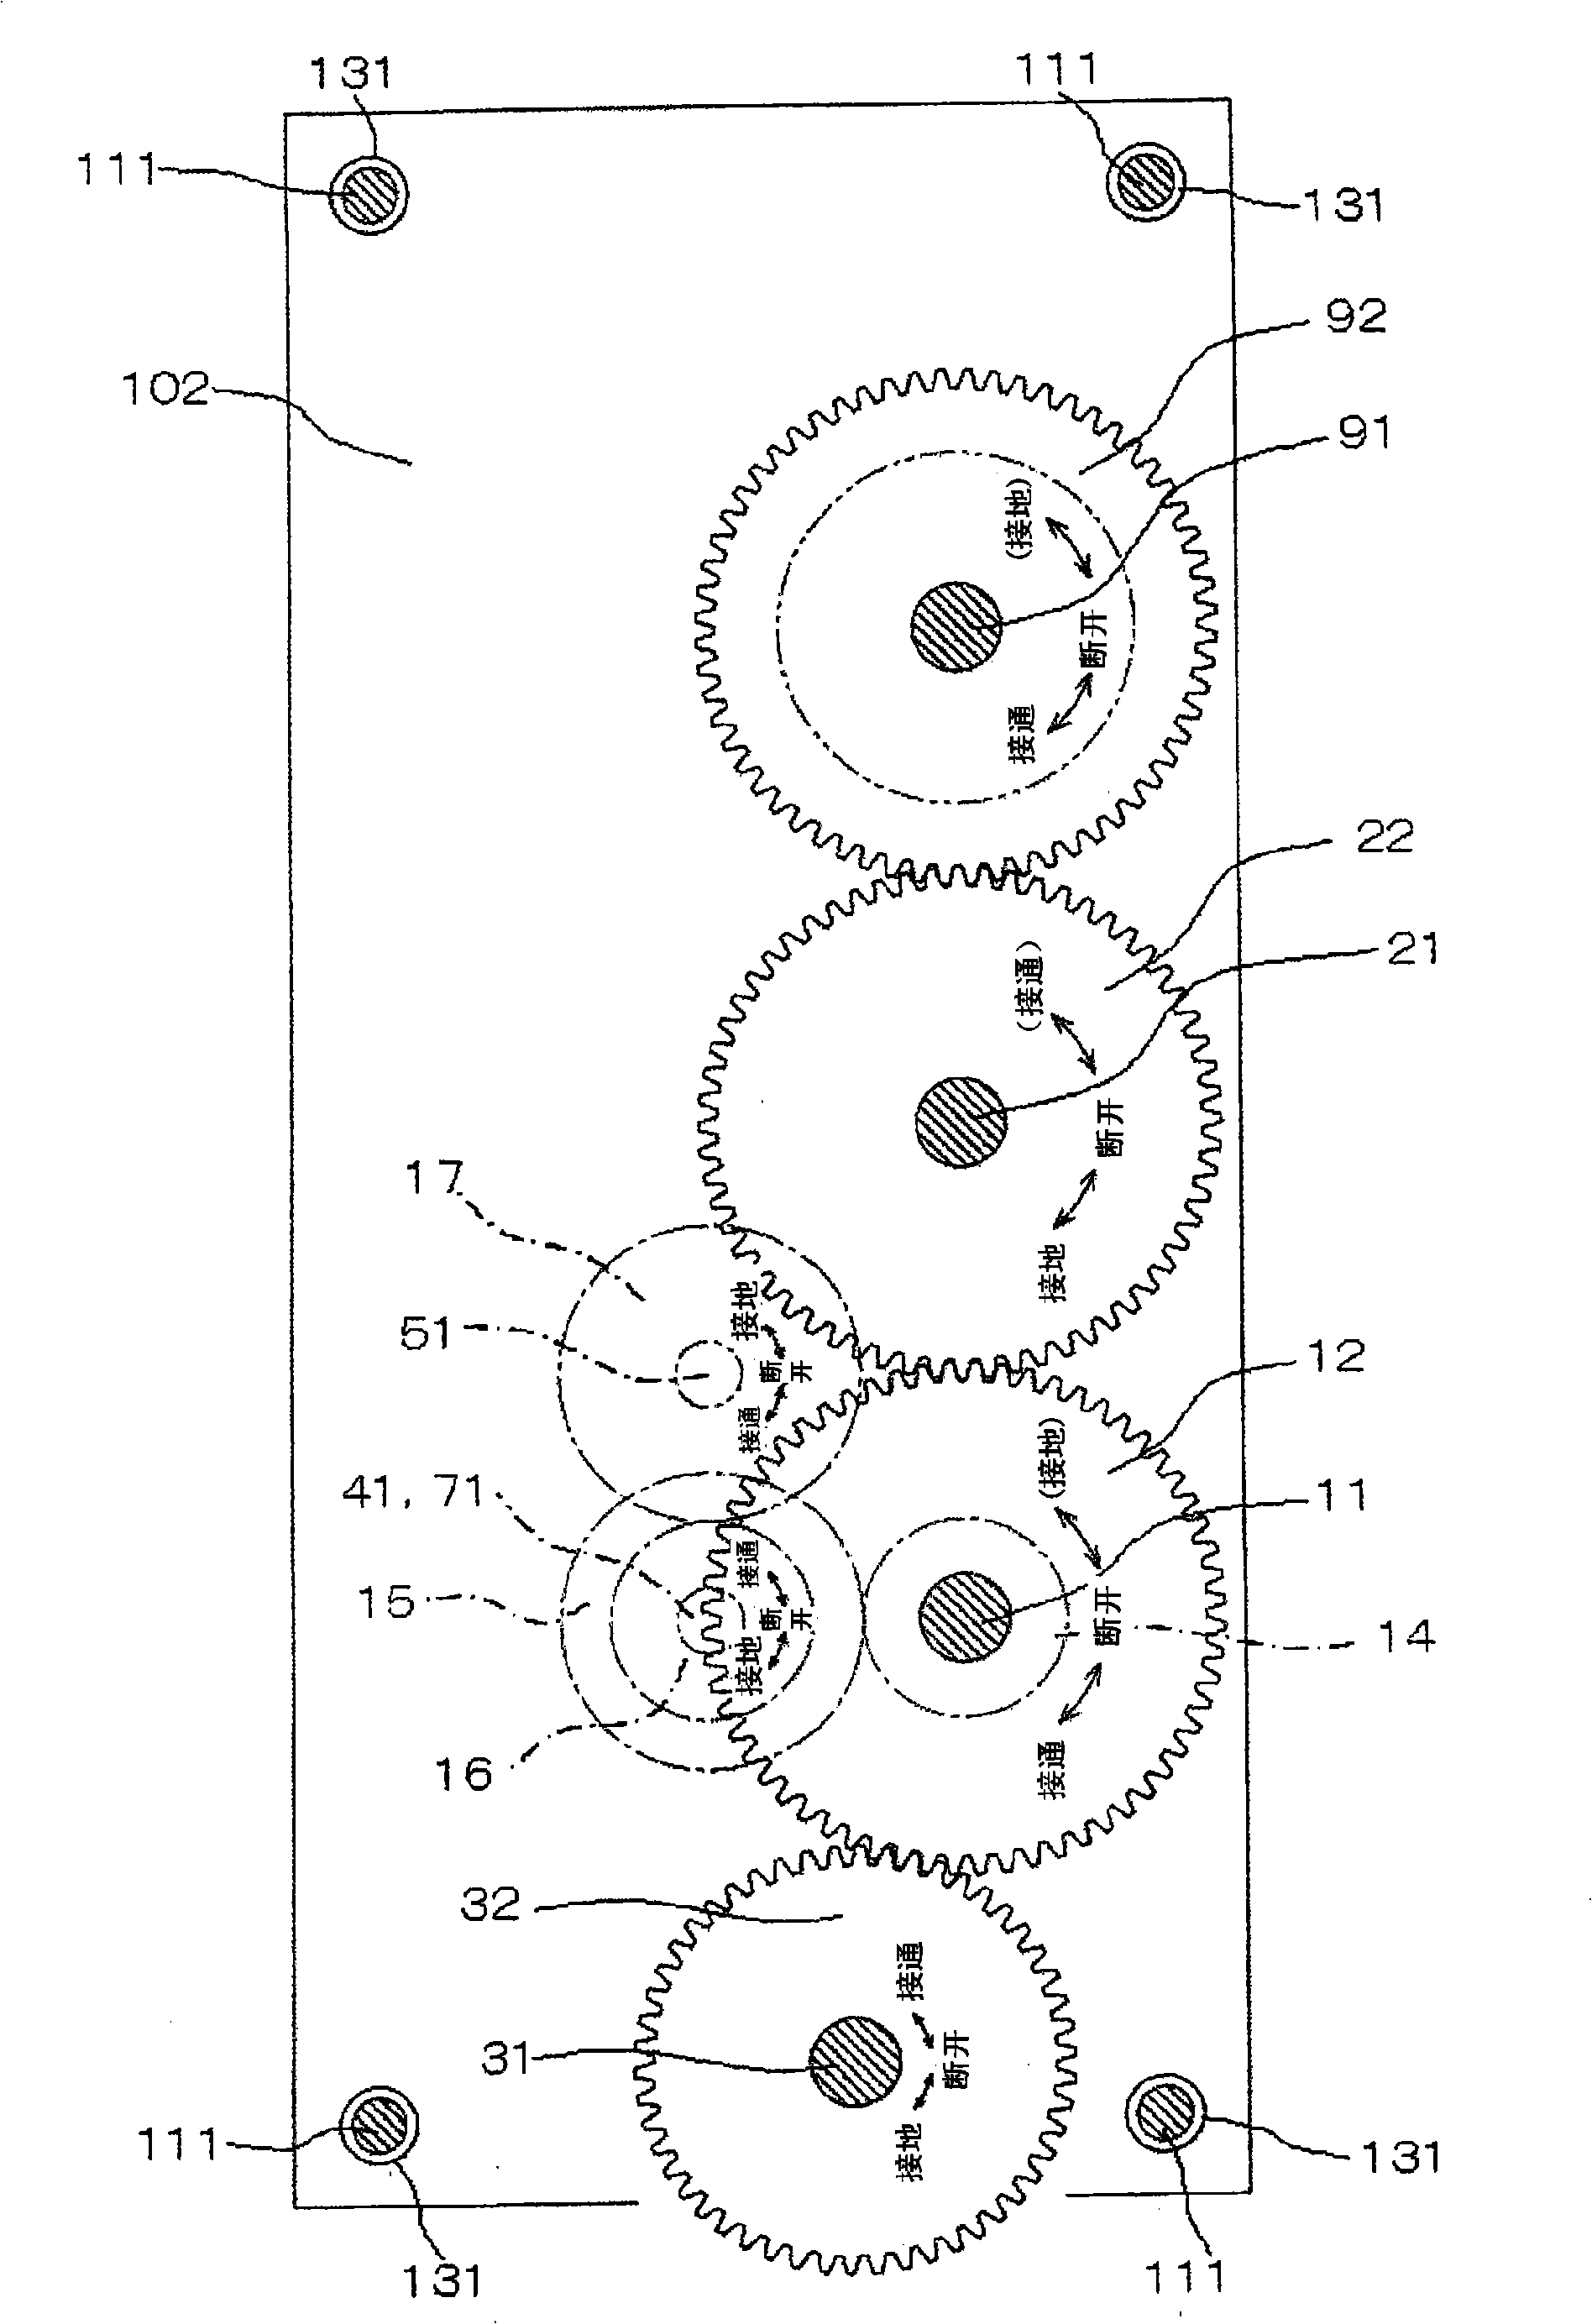 Operation apparatus for three-position switch